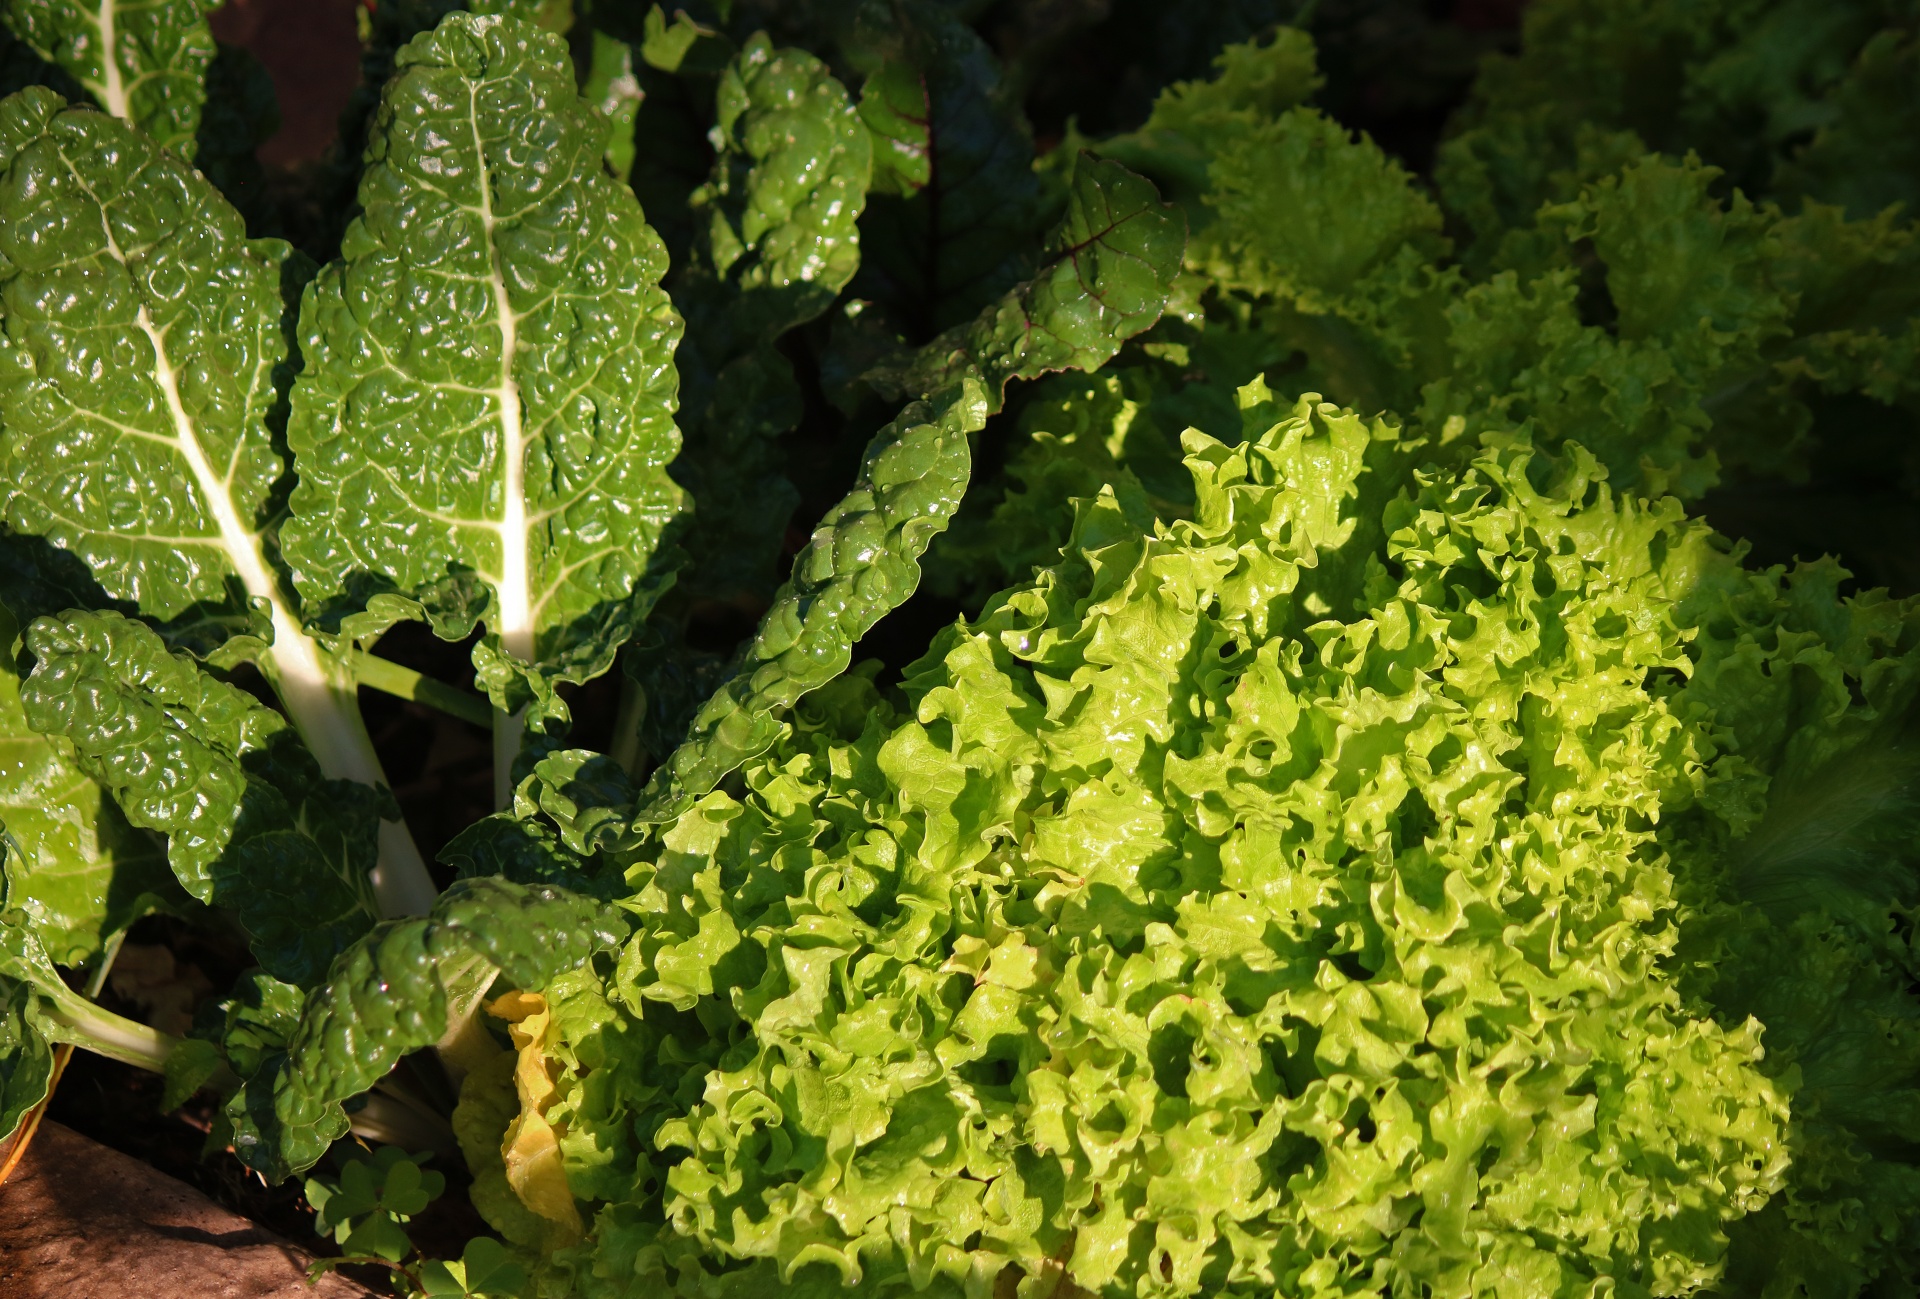 green curly leaf lettuce and spinach in a garden